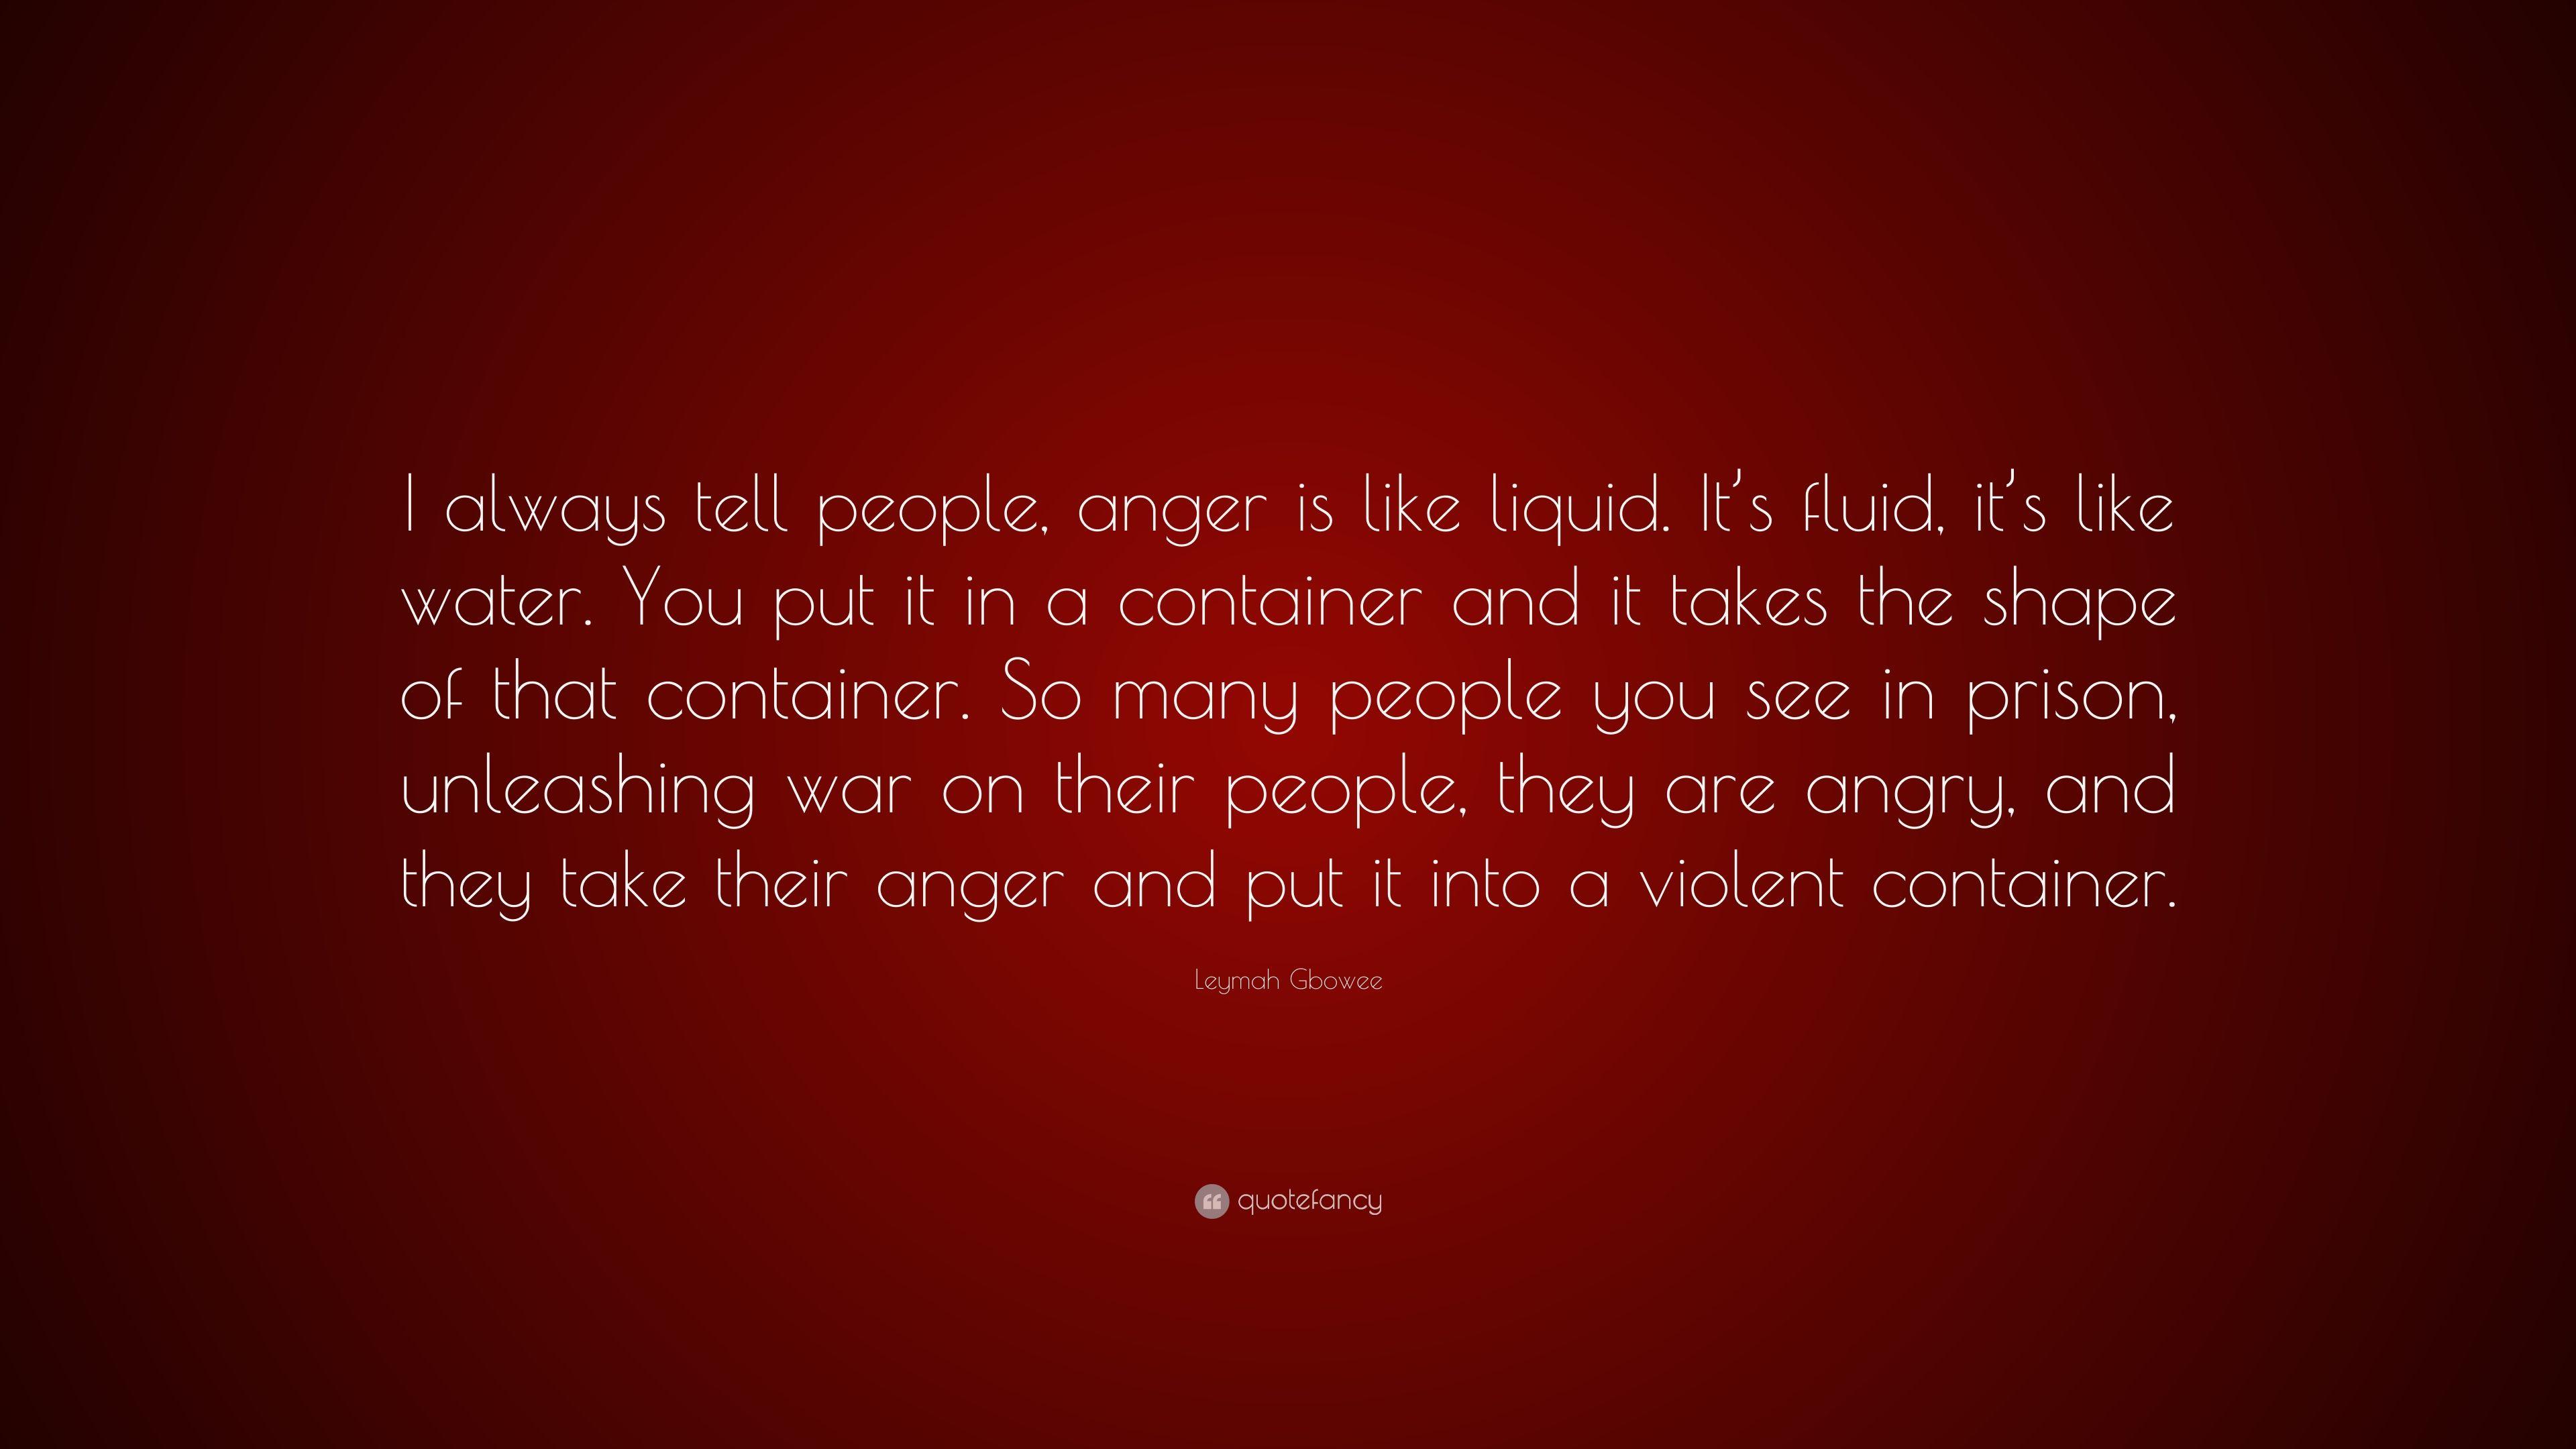 Leymah Gbowee Quote: “I always tell people, anger is like liquid